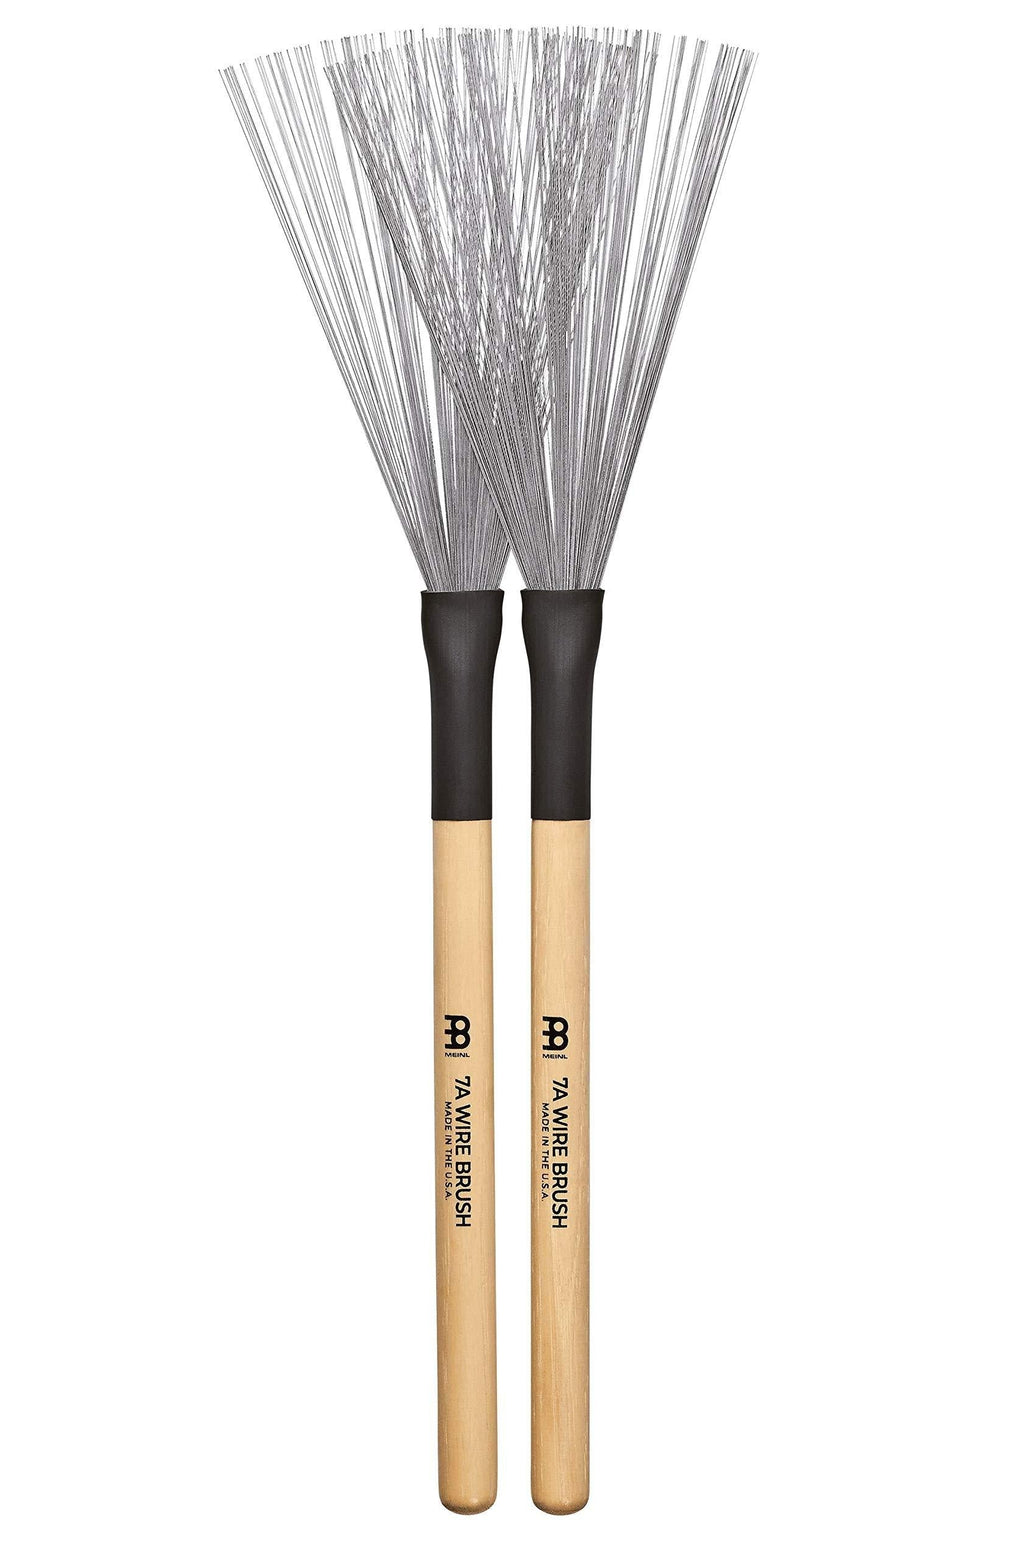 Meinl Stick & Brush Brush with Fixed Wires and Wooden Handle, 7A Size - MADE IN U.S.A. (SB302)